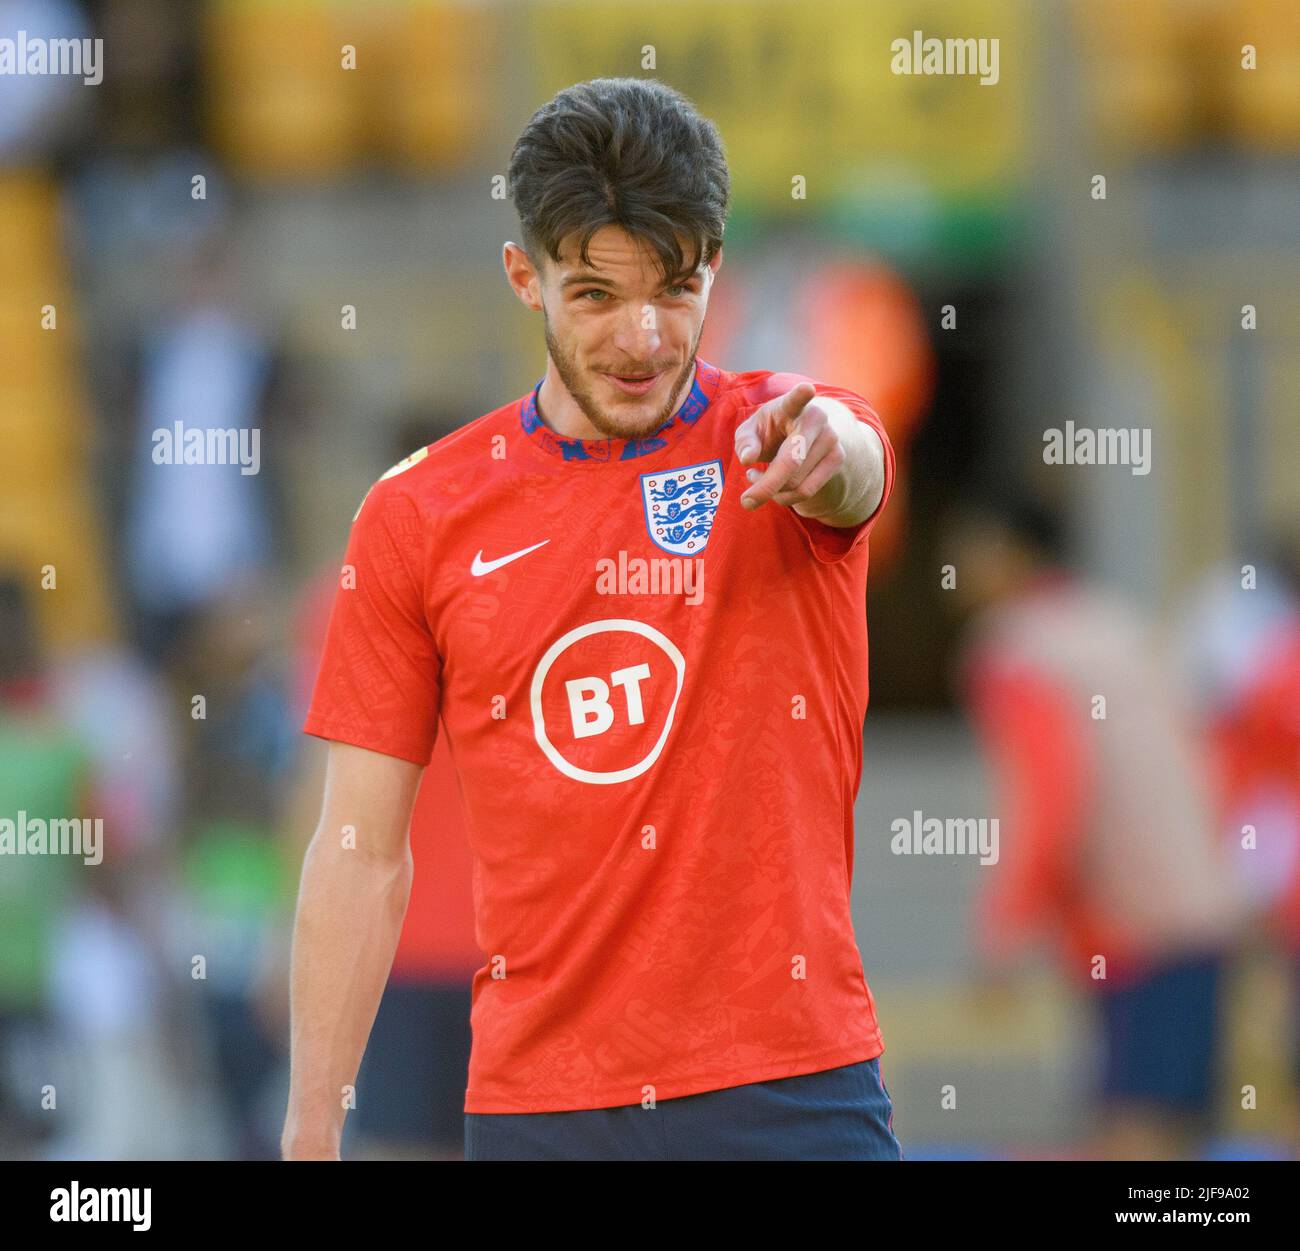 England v Hungary - UEFA Nations League. 14/6/22. Declan Rice during the Nations League match against Hungary. Pic : Mark Pain / Alamy. Stock Photo